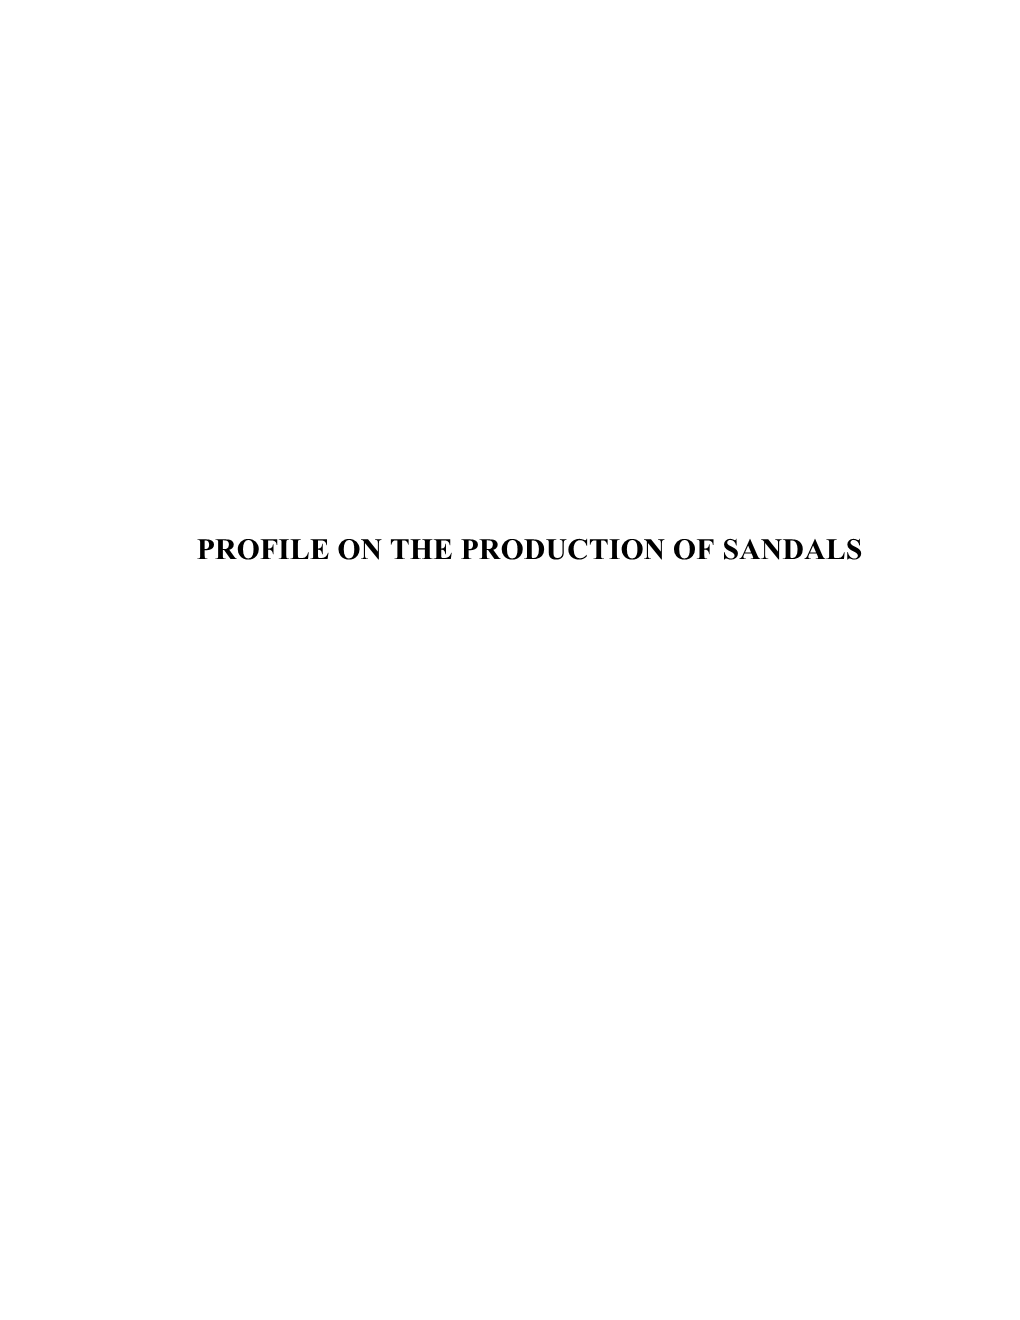 Profile on the Production of Sandals